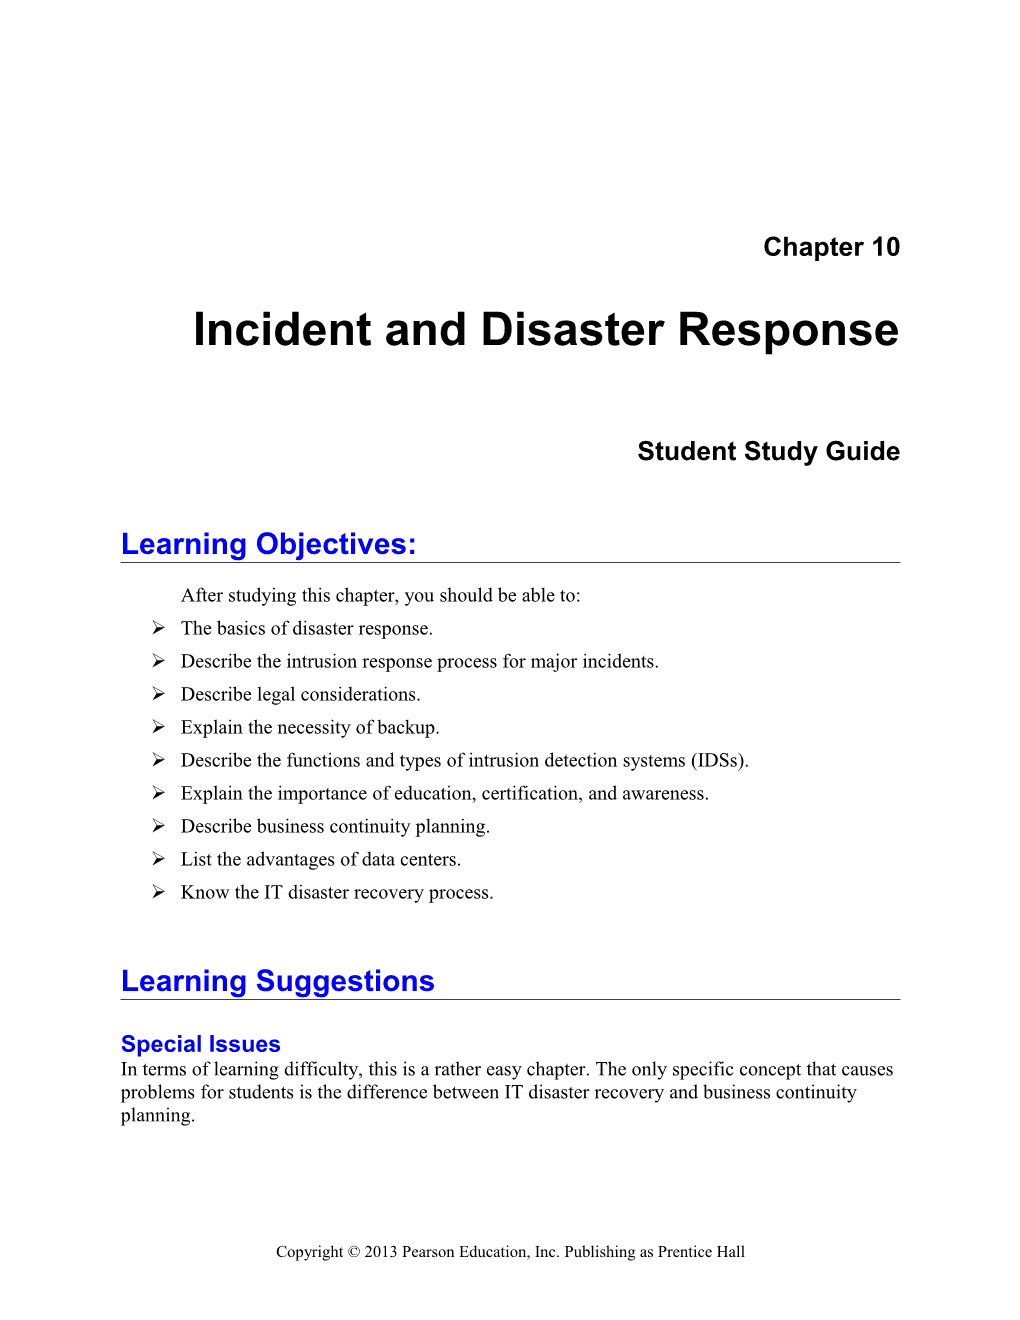 Chapter 10: Incident and Disaster Response